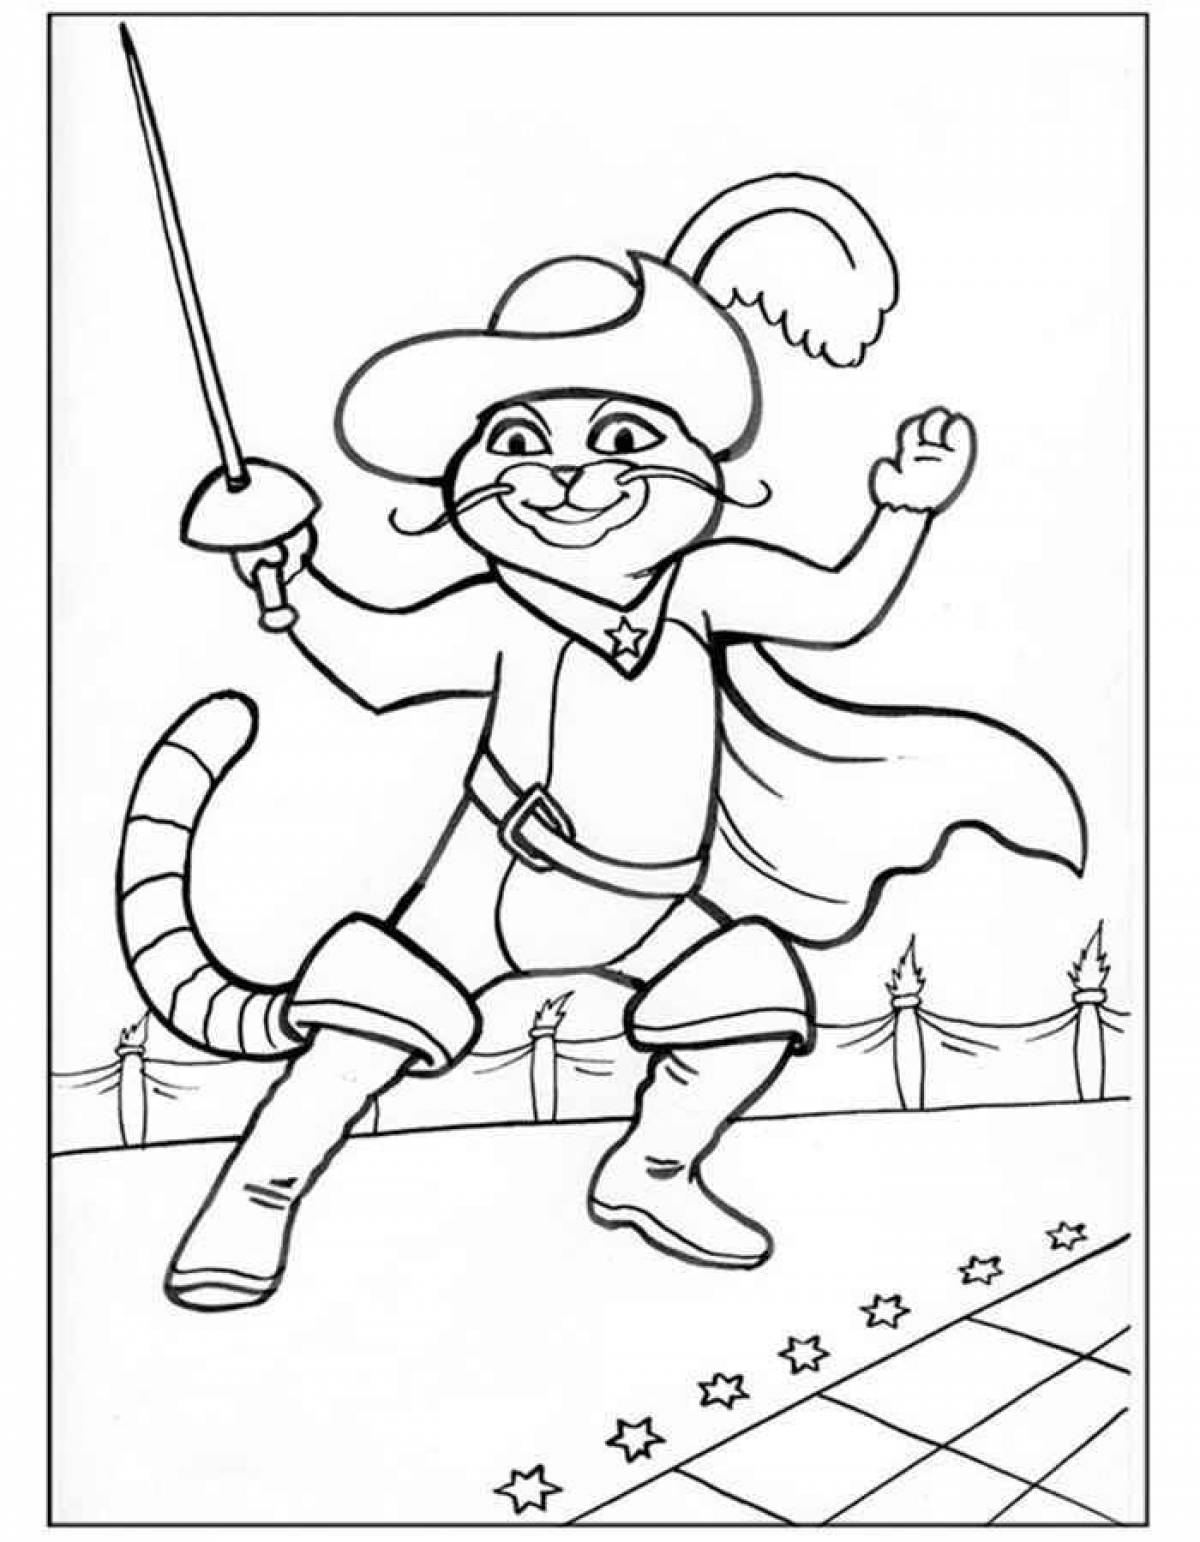 Fun coloring book Puss in Boots for kids